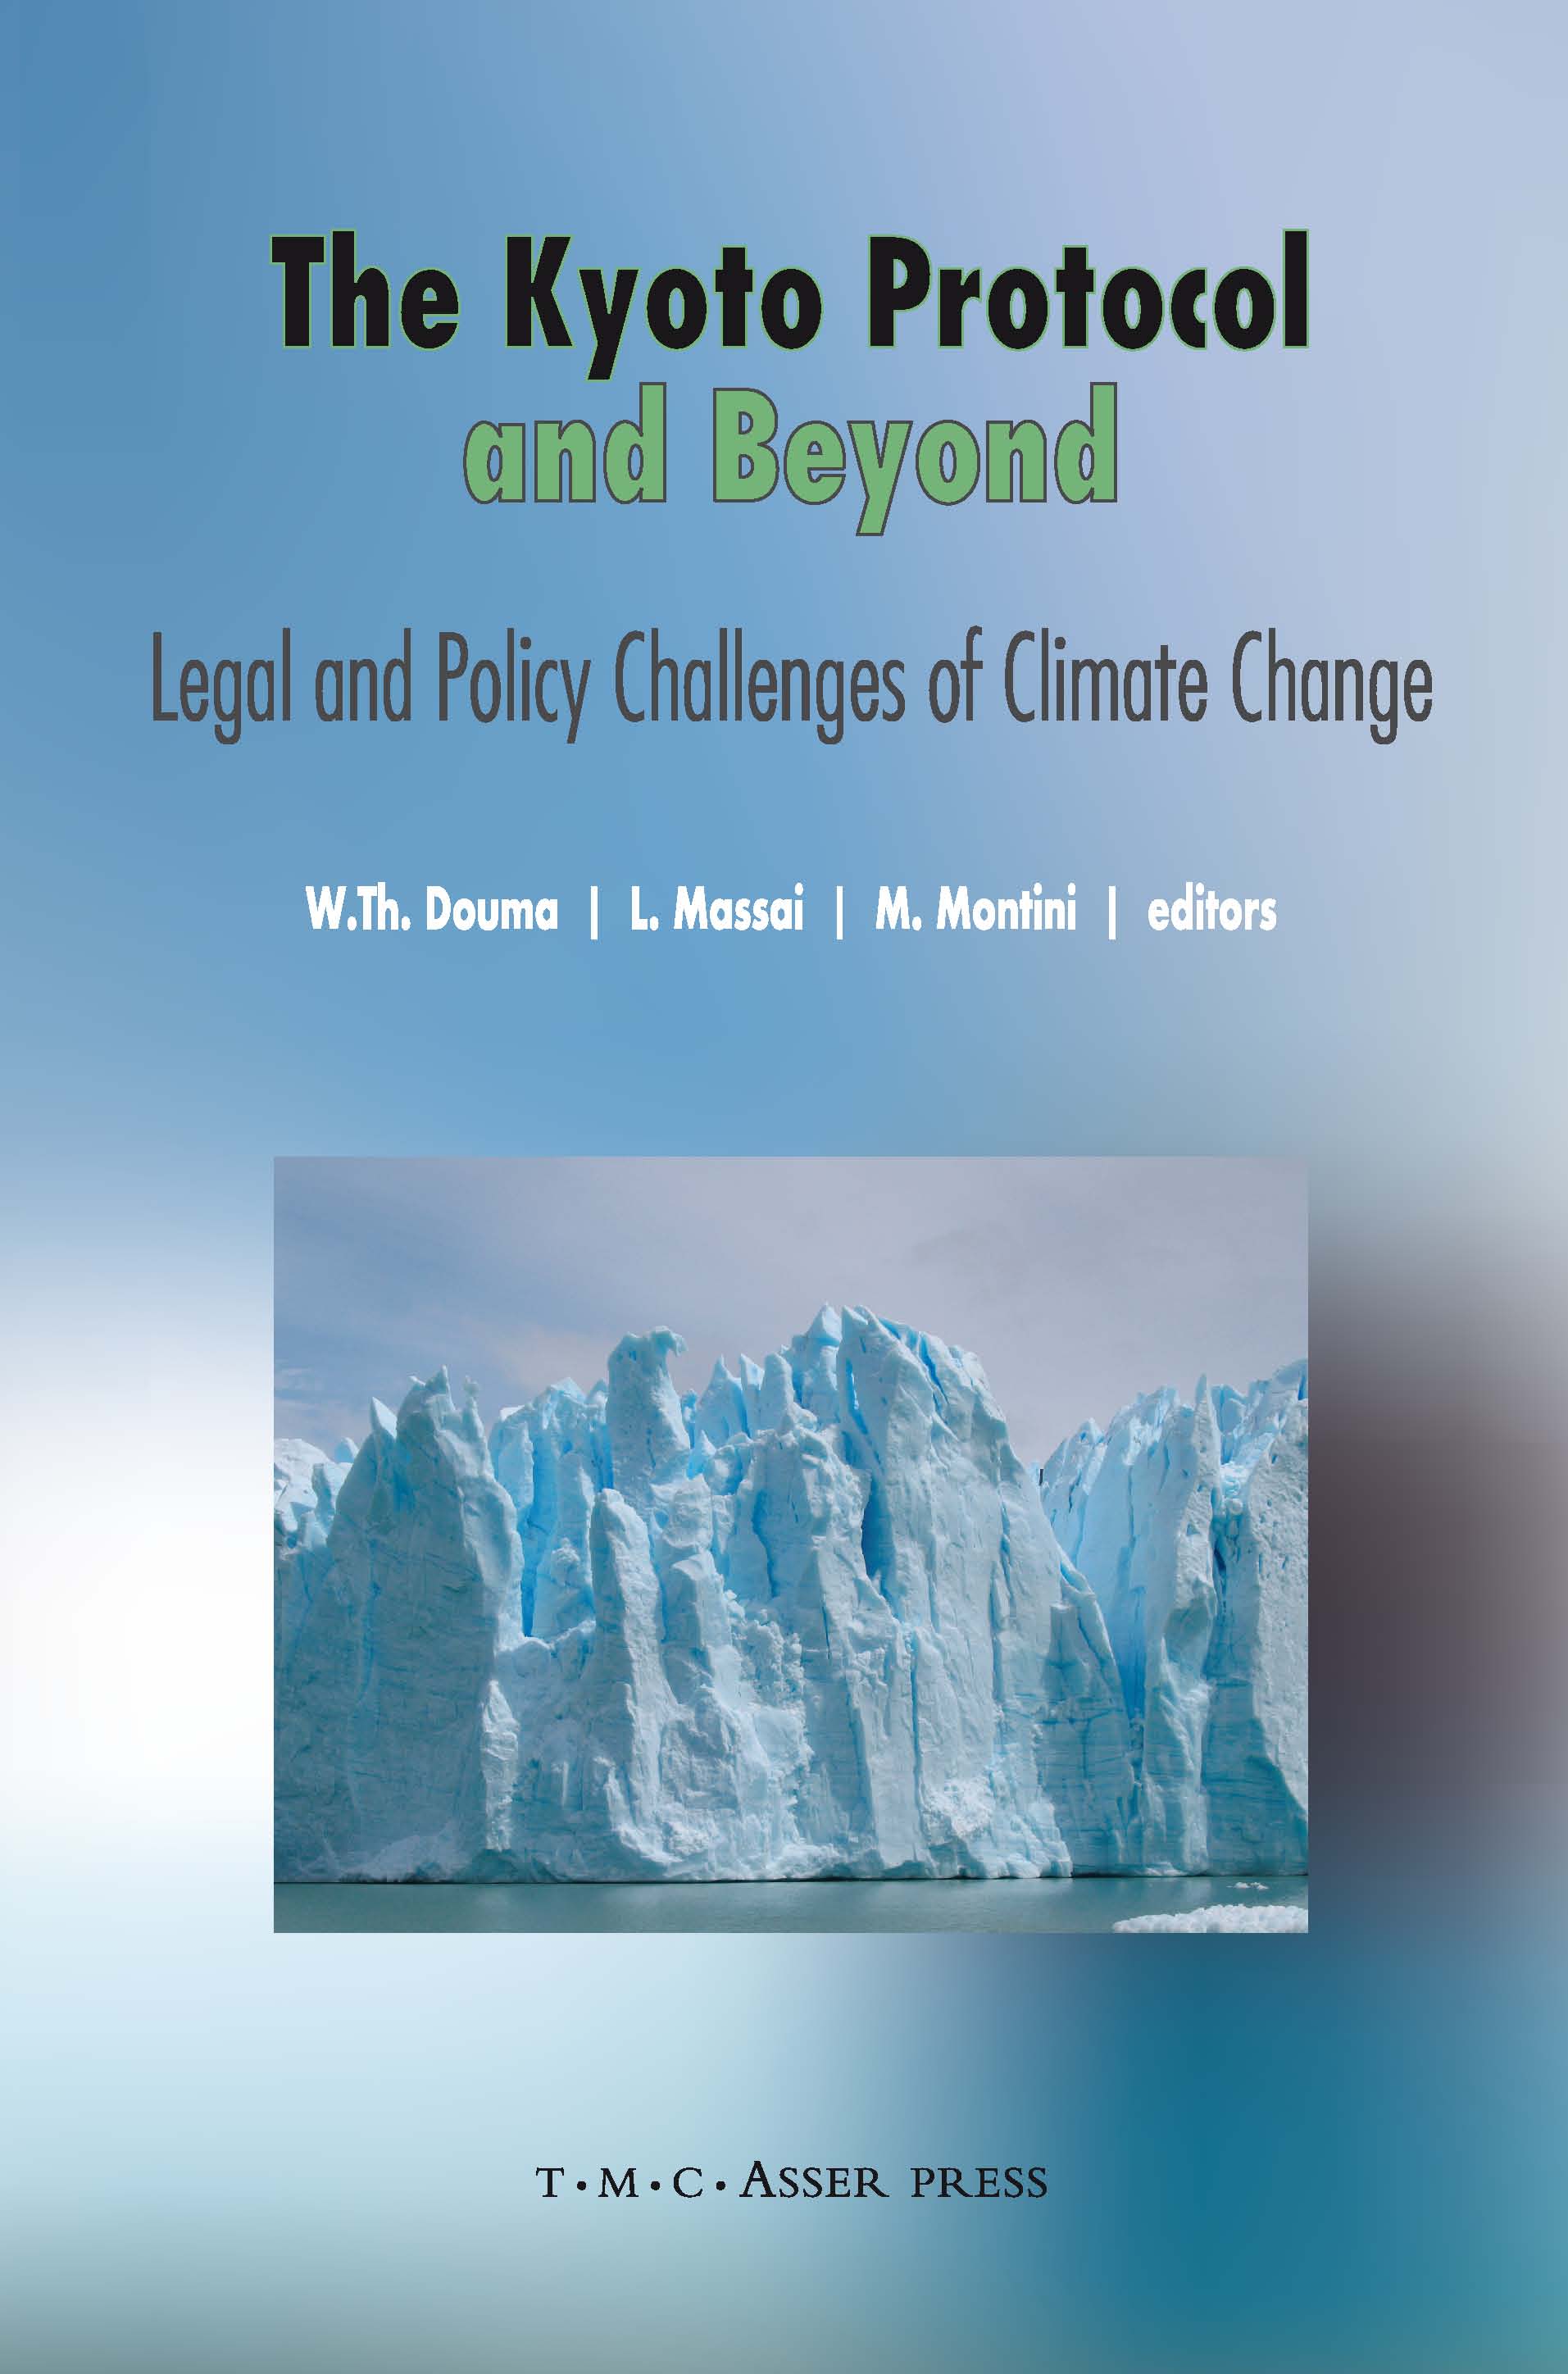 The Kyoto Protocol and Beyond - Legal and Policy Challenges of Climate Change